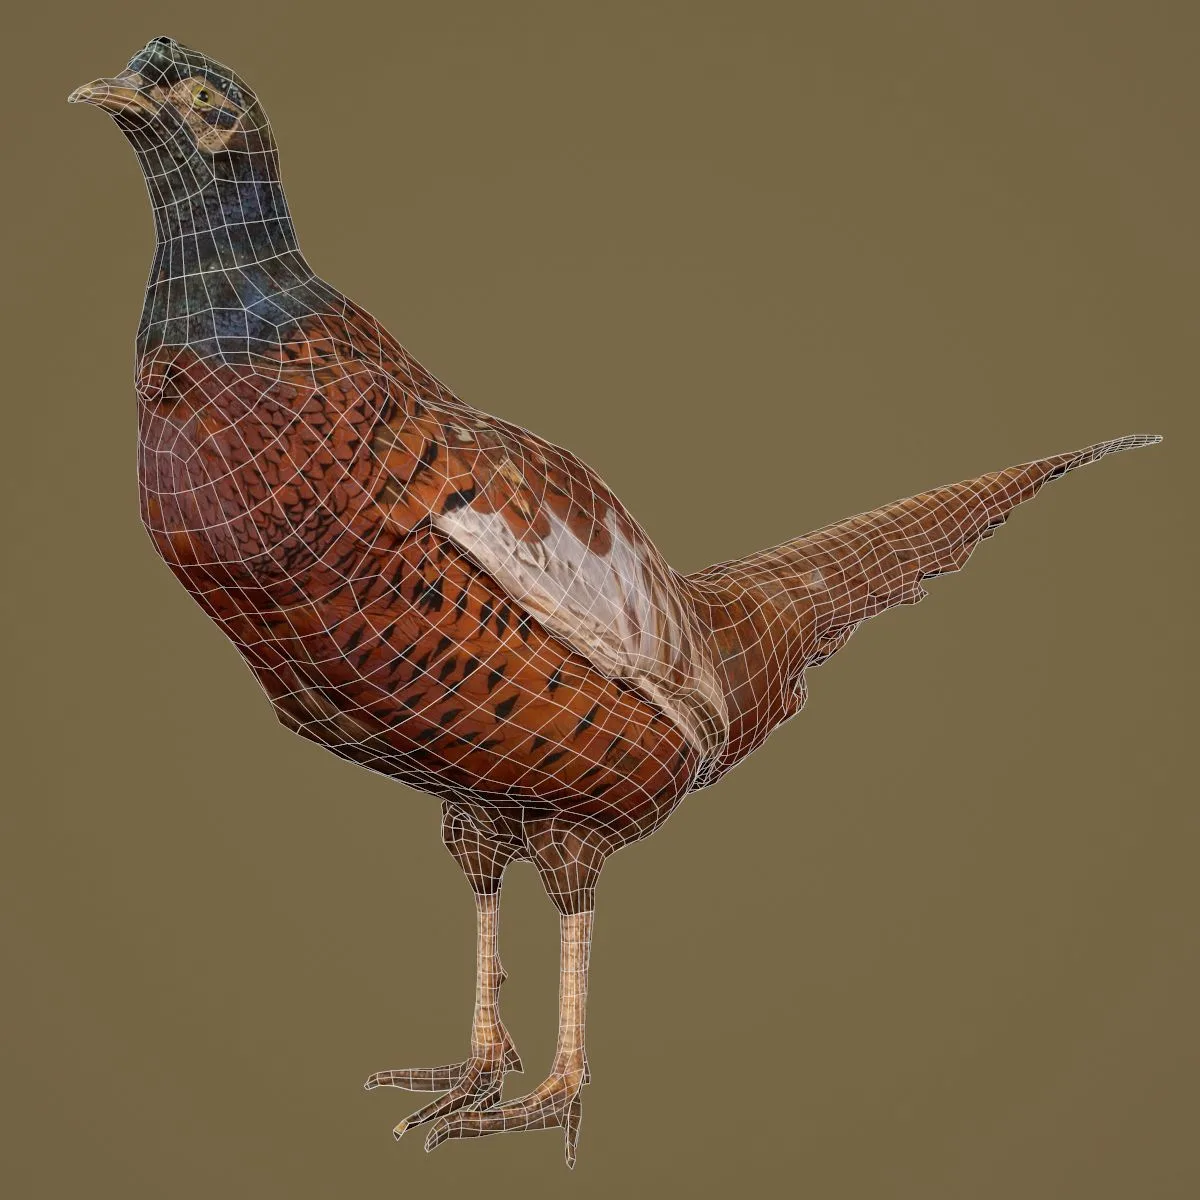 36 Realistic 3D Scanned Animals and Birds for Virtual Museums, VR, and Art Projects Master Collection